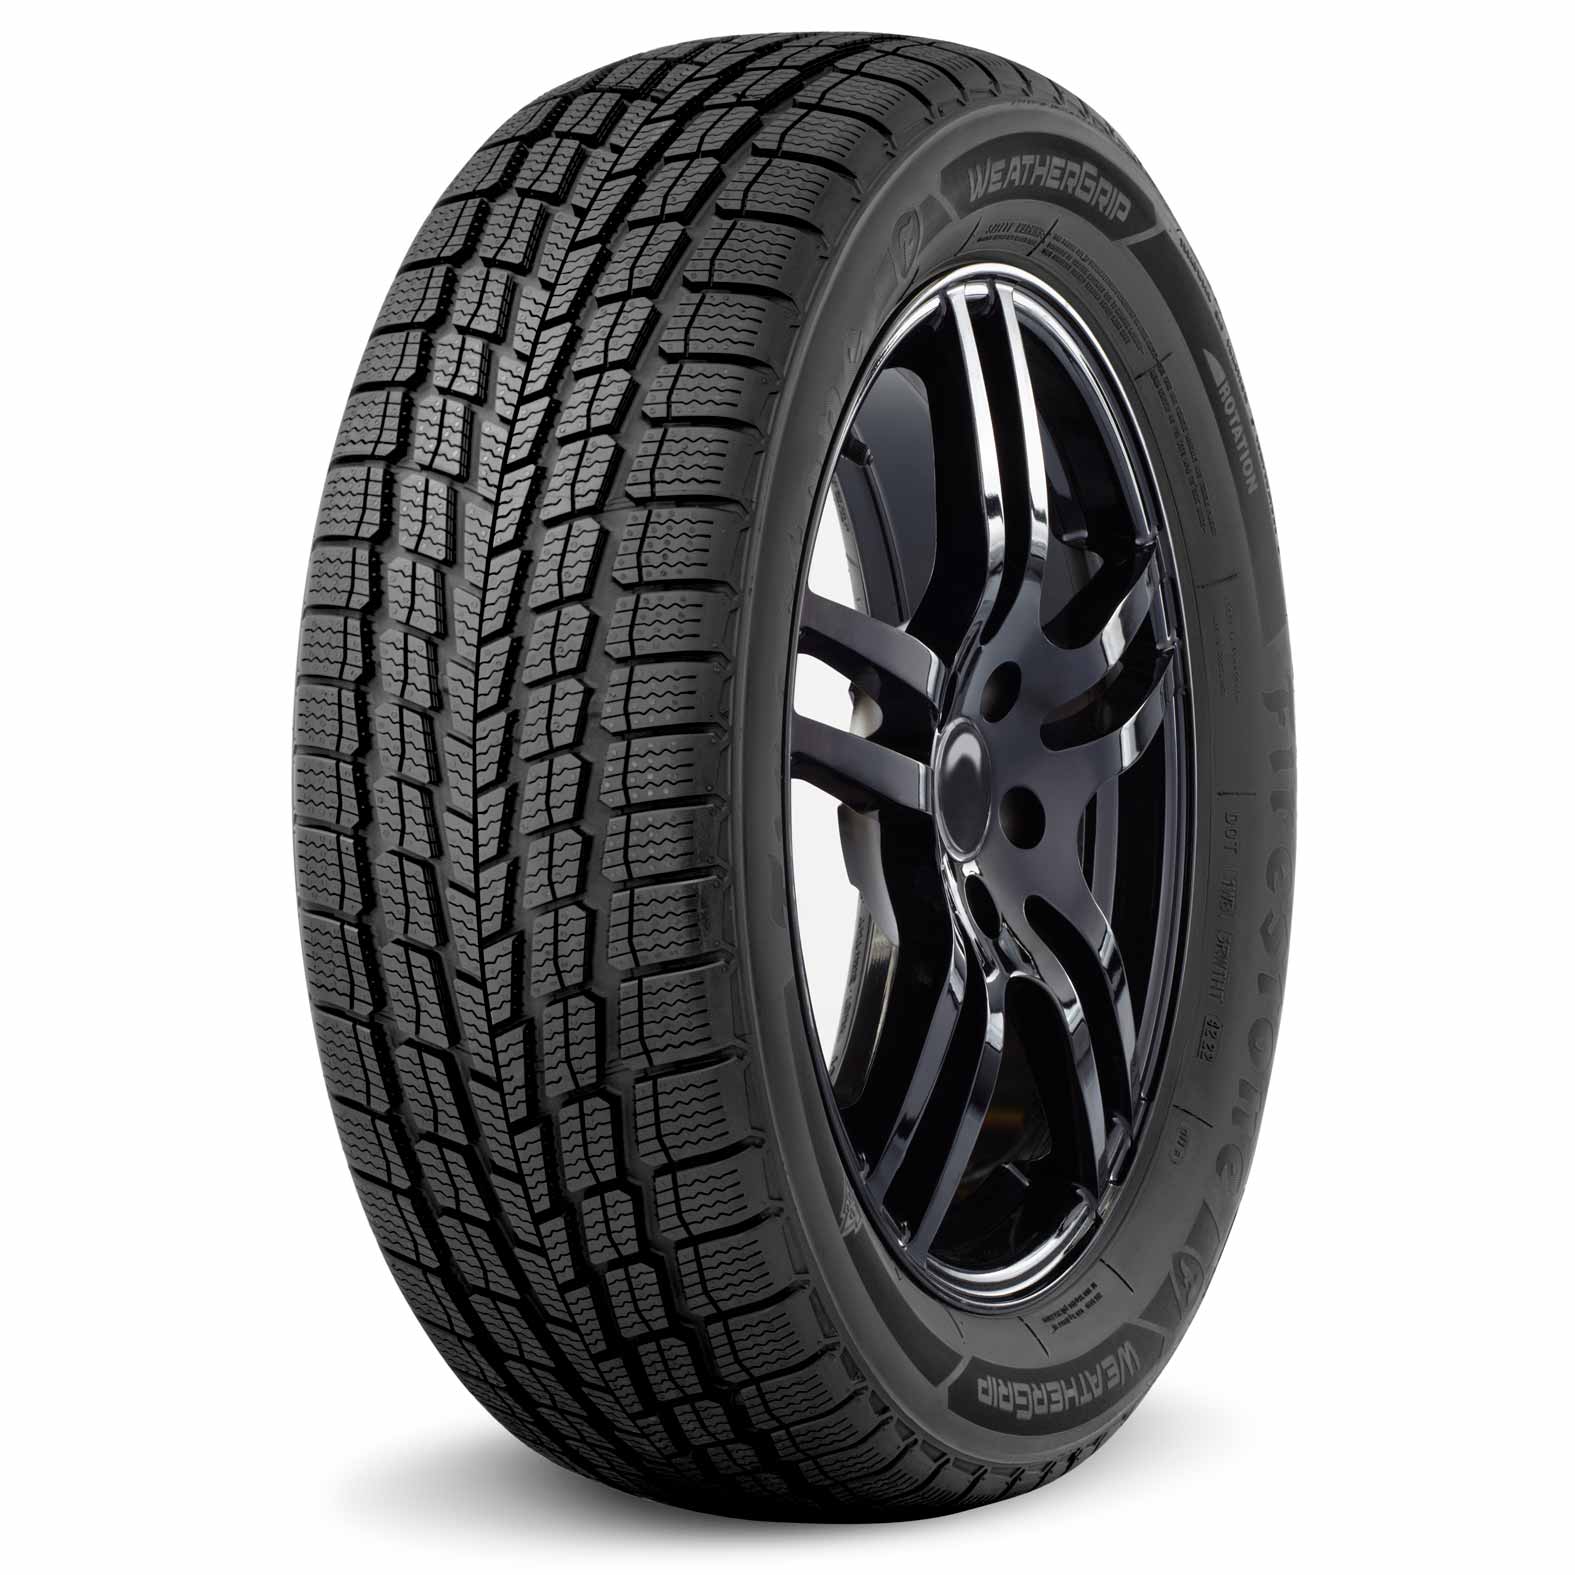 Firestone Weather Grip Tires for Winter